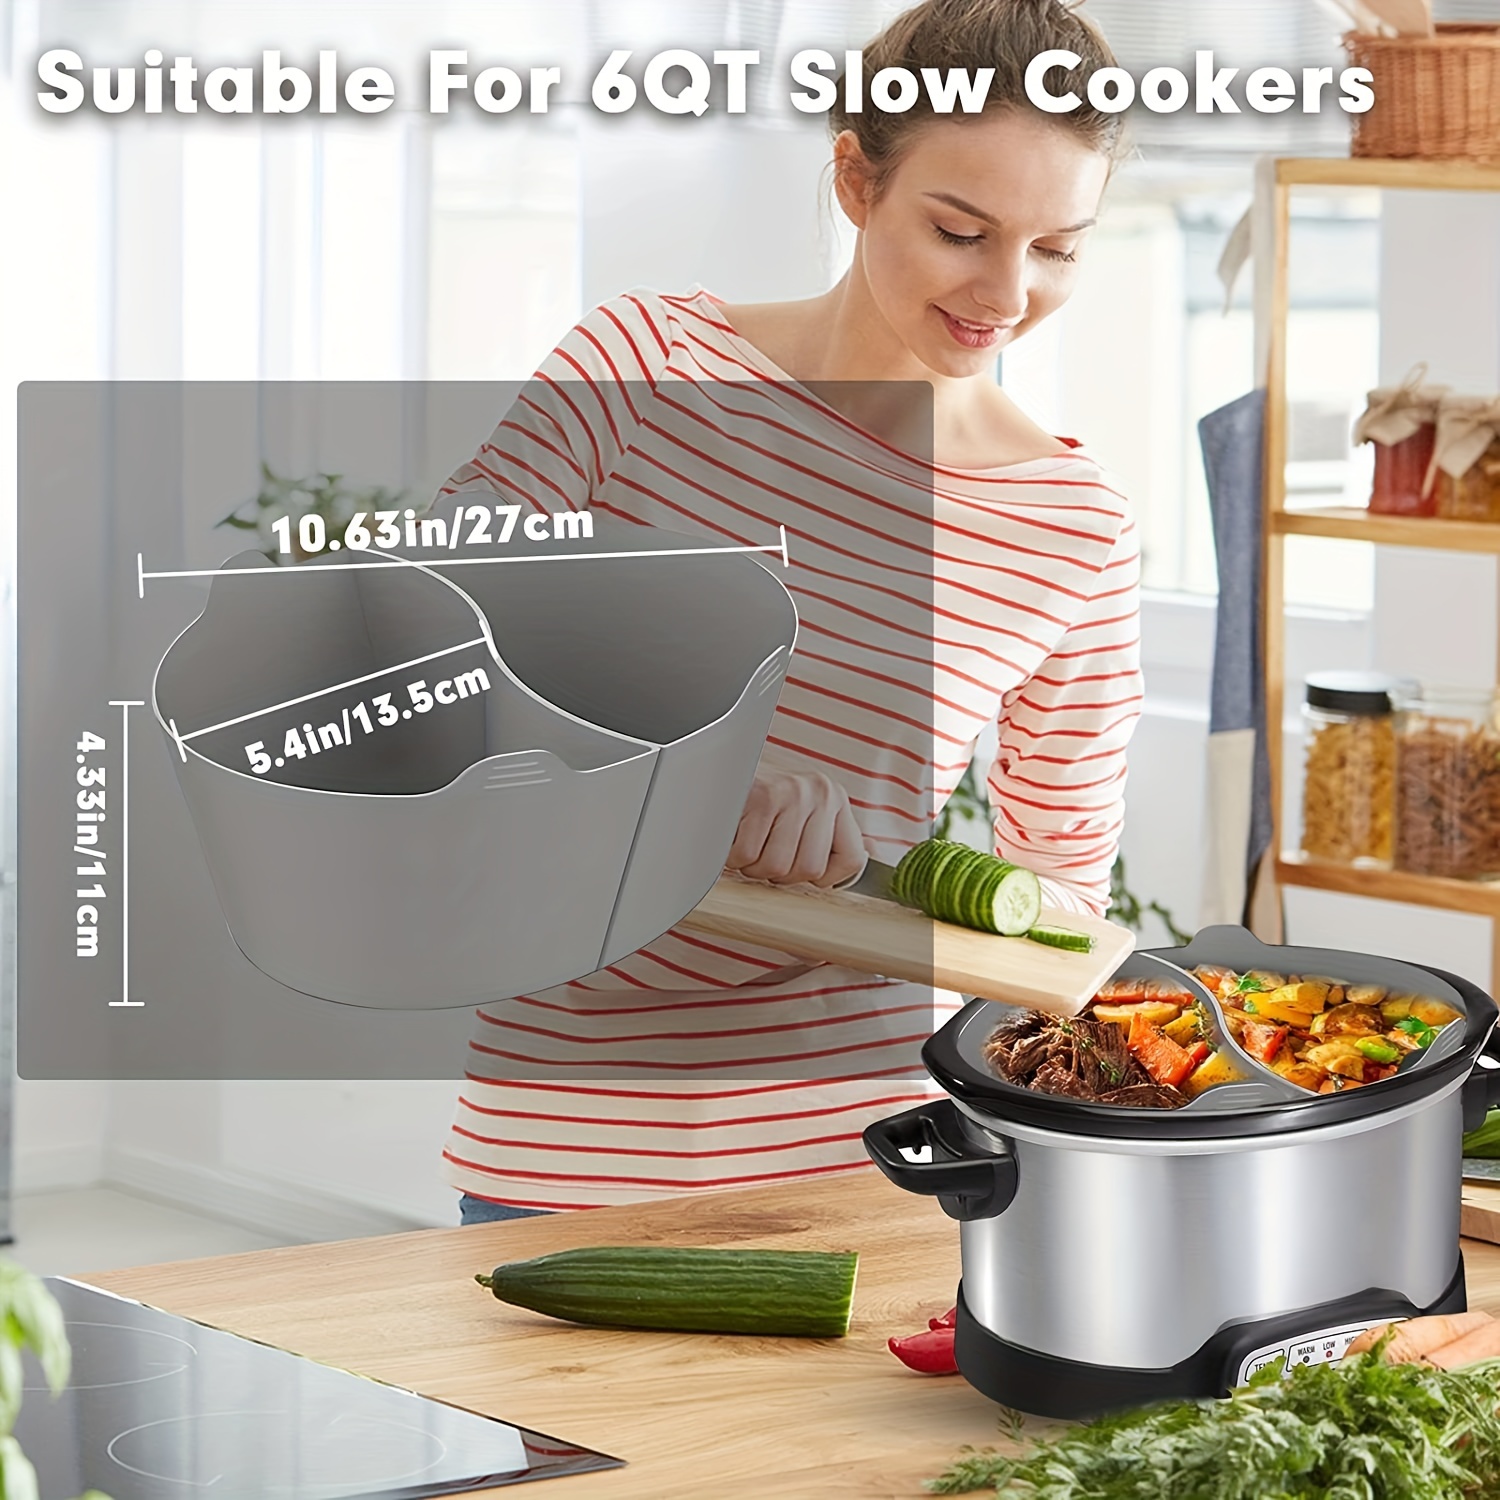 BYKITCHEN 7-8 Quart Silicone Slow Cooker Divider Liner Compatible with  Crockpot, Hamilton Beach Slow Cooker, 3-in-1, Large Reusable Slow Cooker